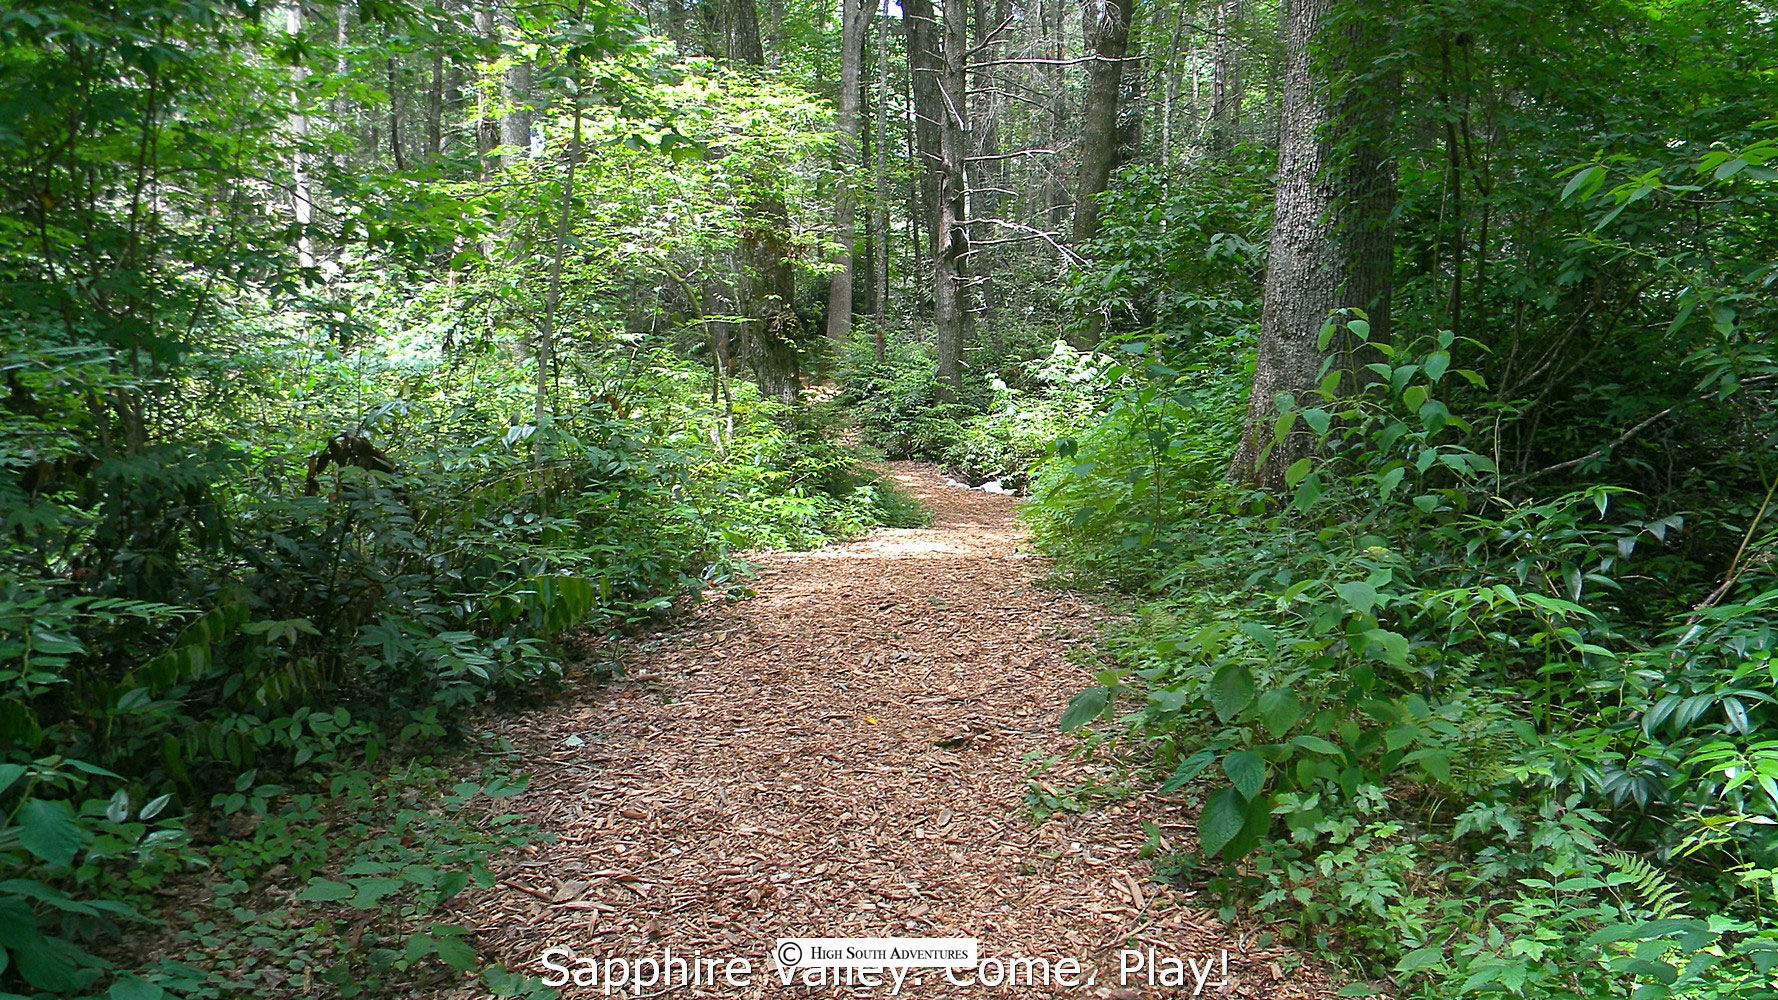 he River Walk has a fresh bed of mulch and really has zero elevation change making it a nice walk for young and old alike.  We hope you enjoy this recently renovated Sapphire Valley Resort Amenity!